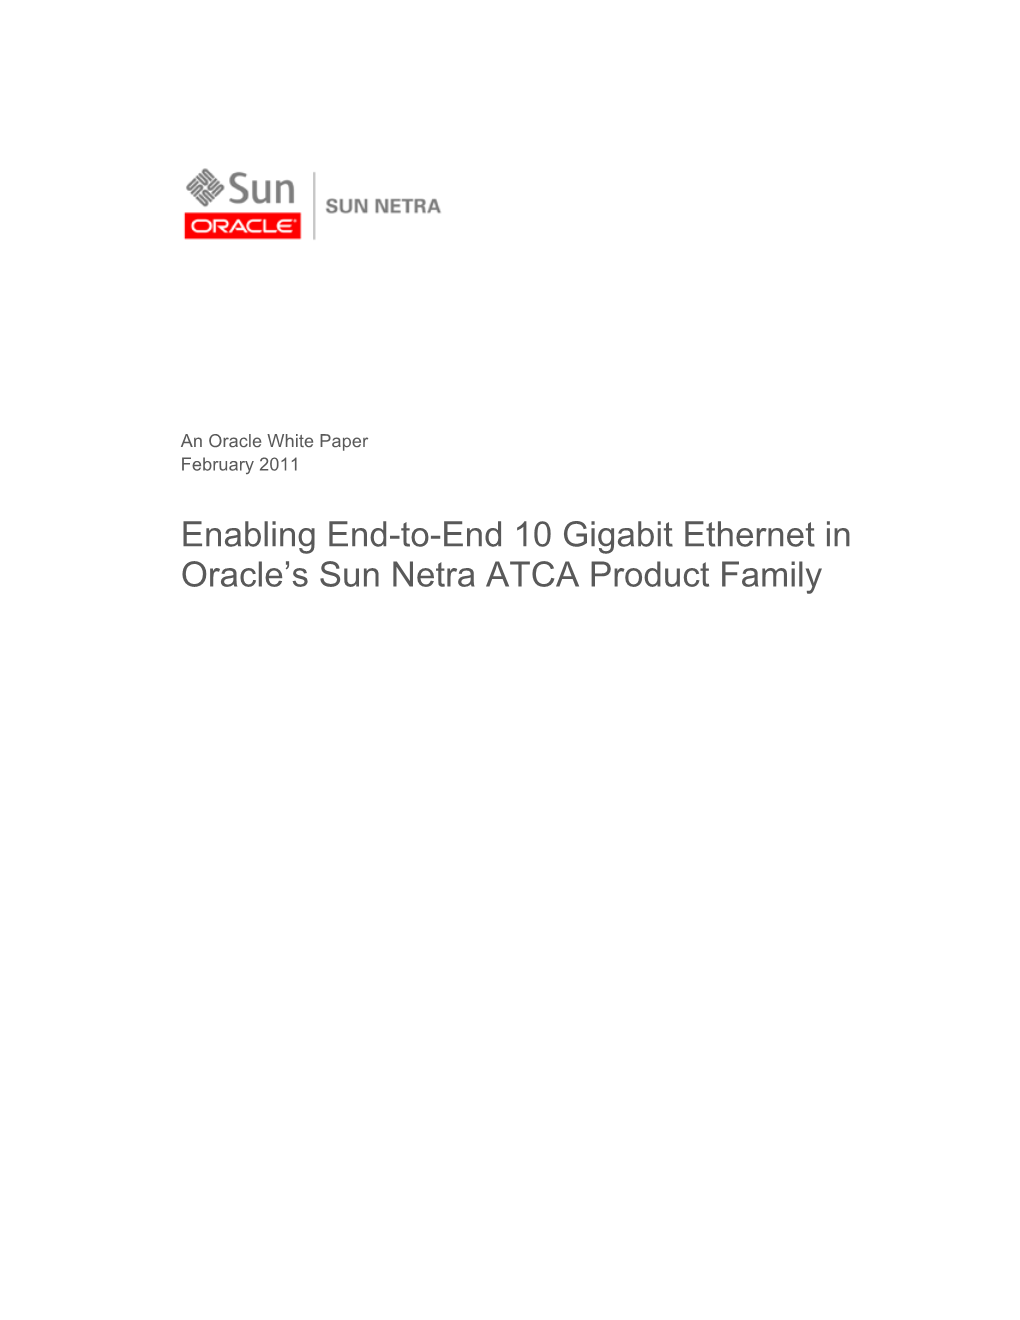 Enabling End-To-End 10 Gigabit Ethernet in Oracle's Sun Netra ATCA Product Family